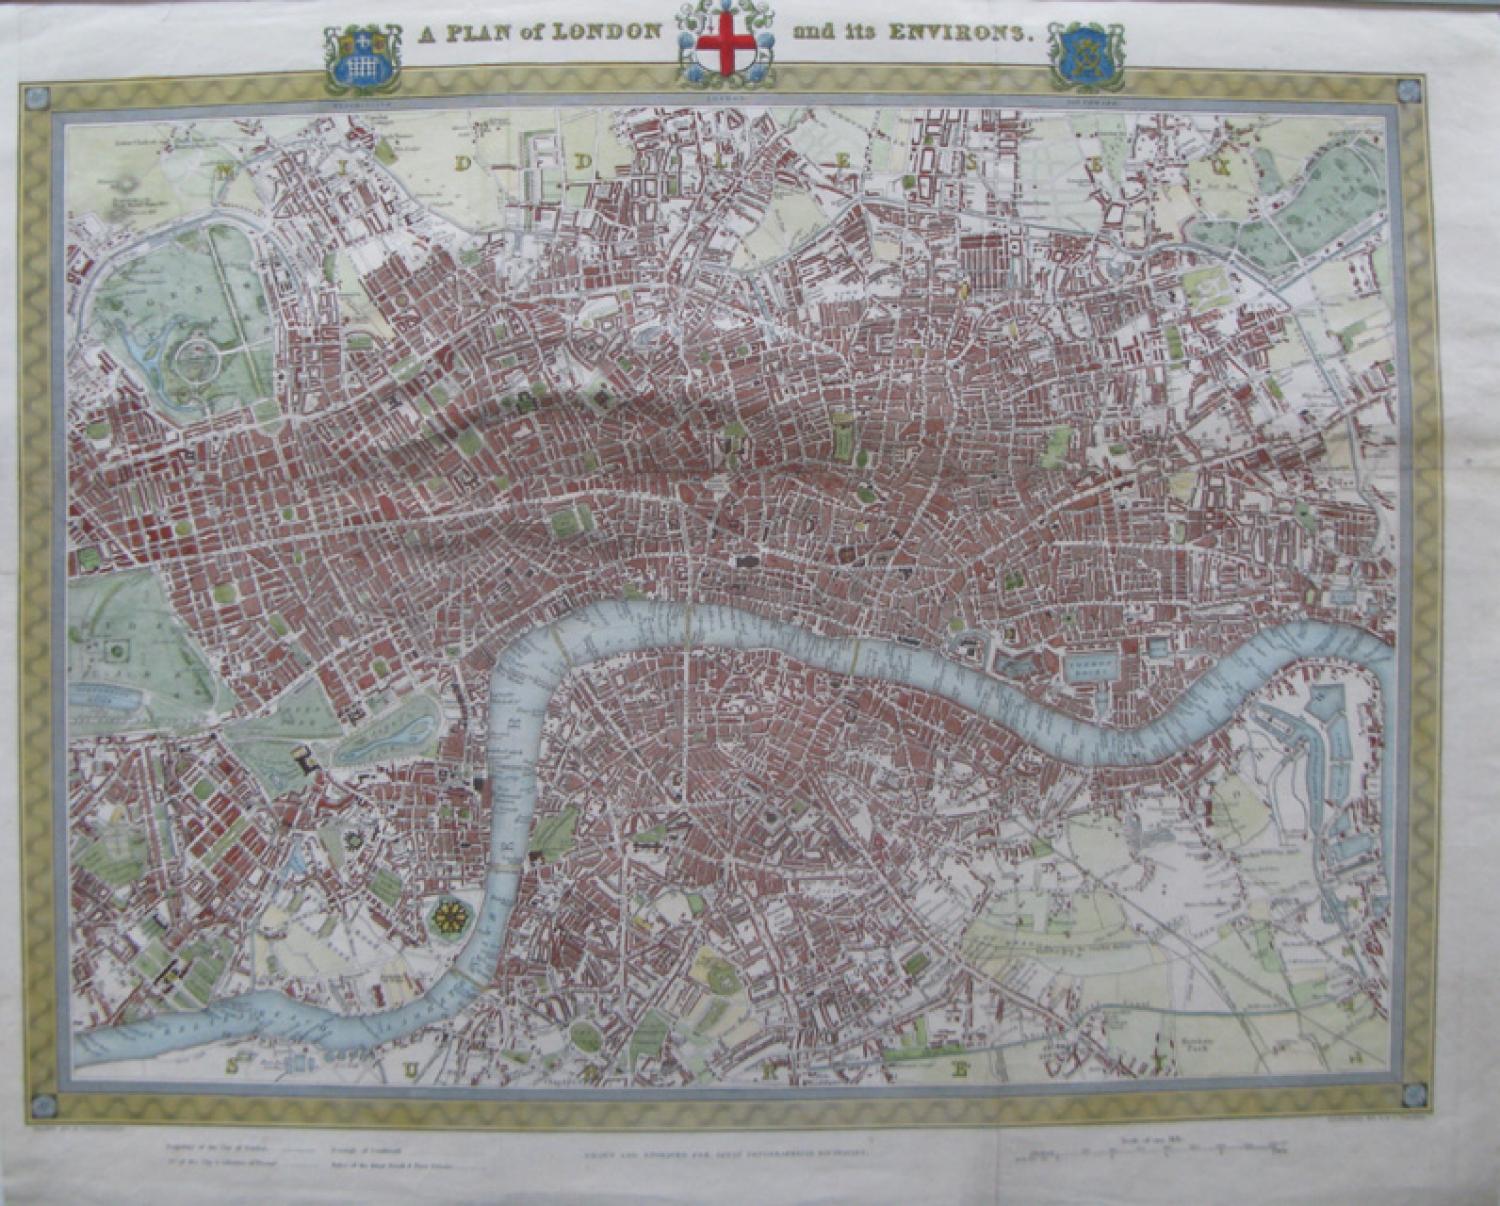 SOLD A Plan of London and its Environs